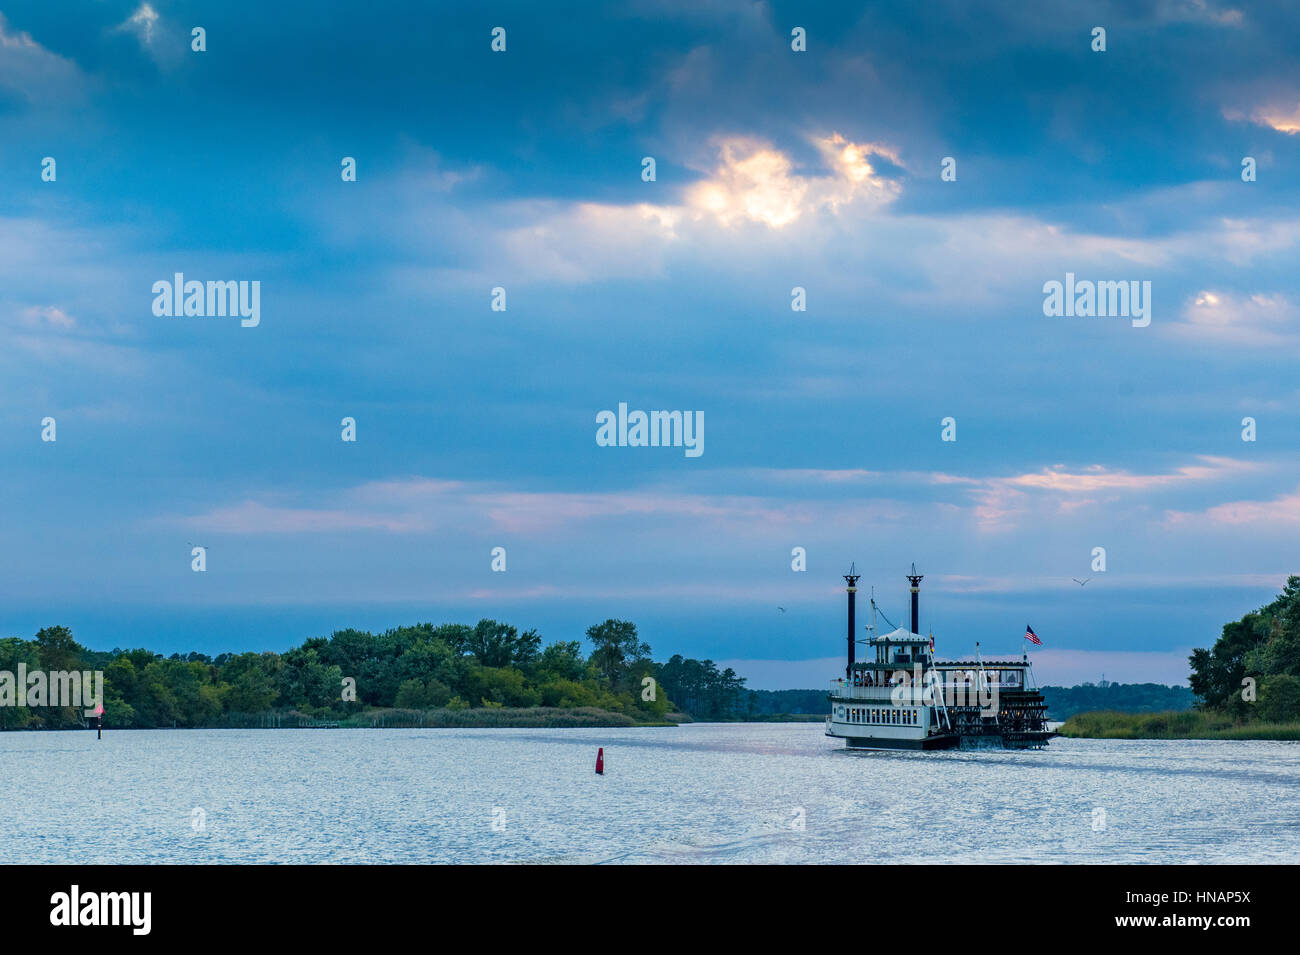 A paddlewheel riverboat travels through the Chesapeake bay at sunset in Secretary, Maryland. Stock Photo